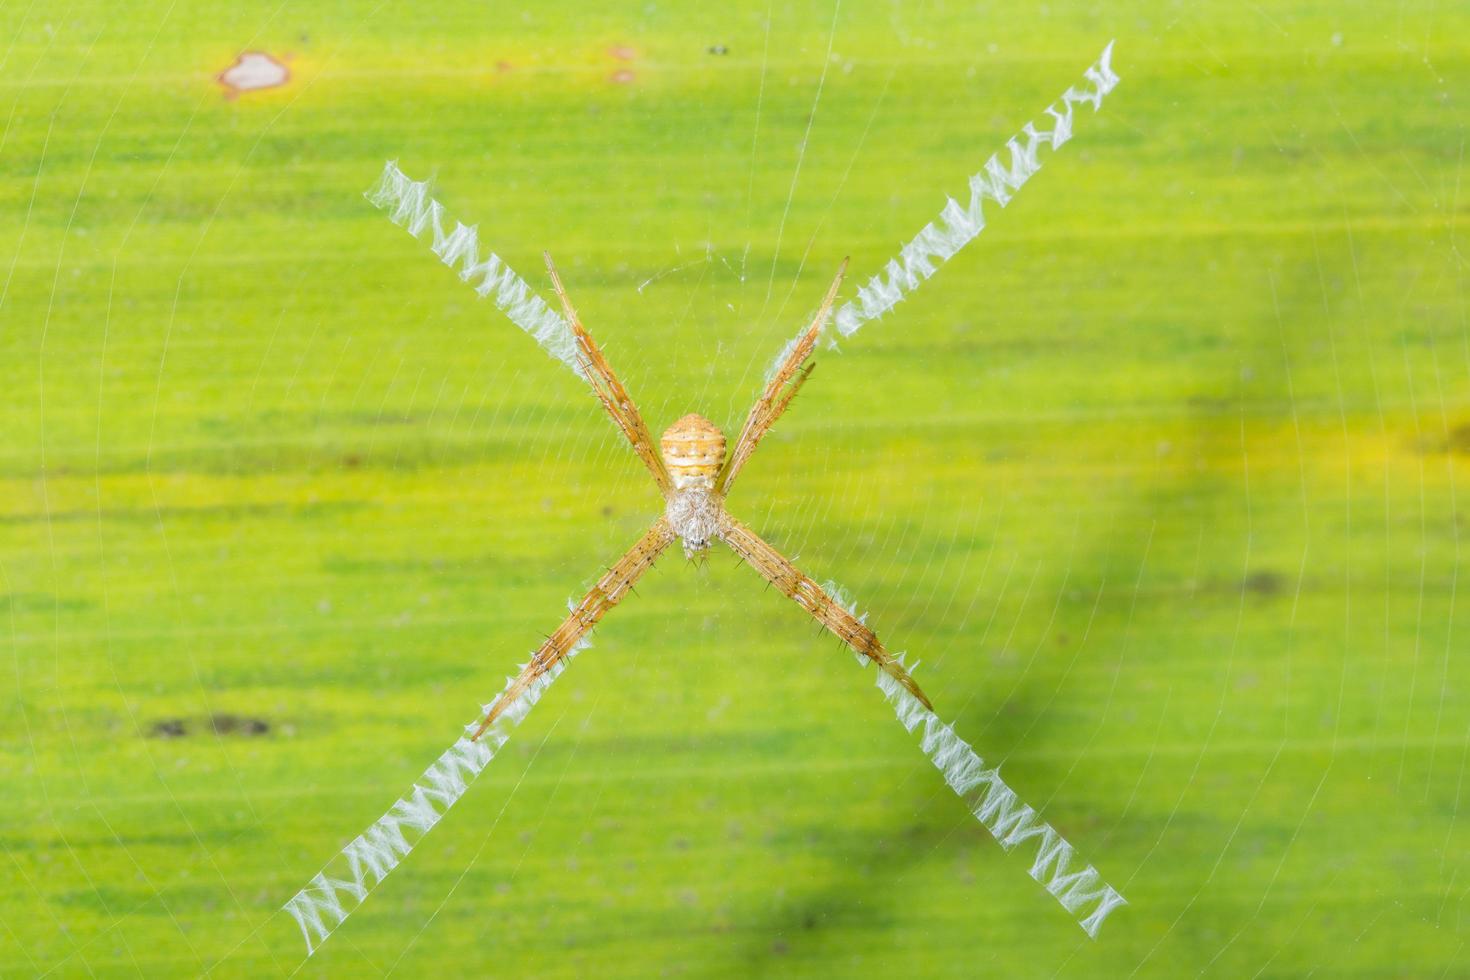 Spider above a leaf, close-up photo